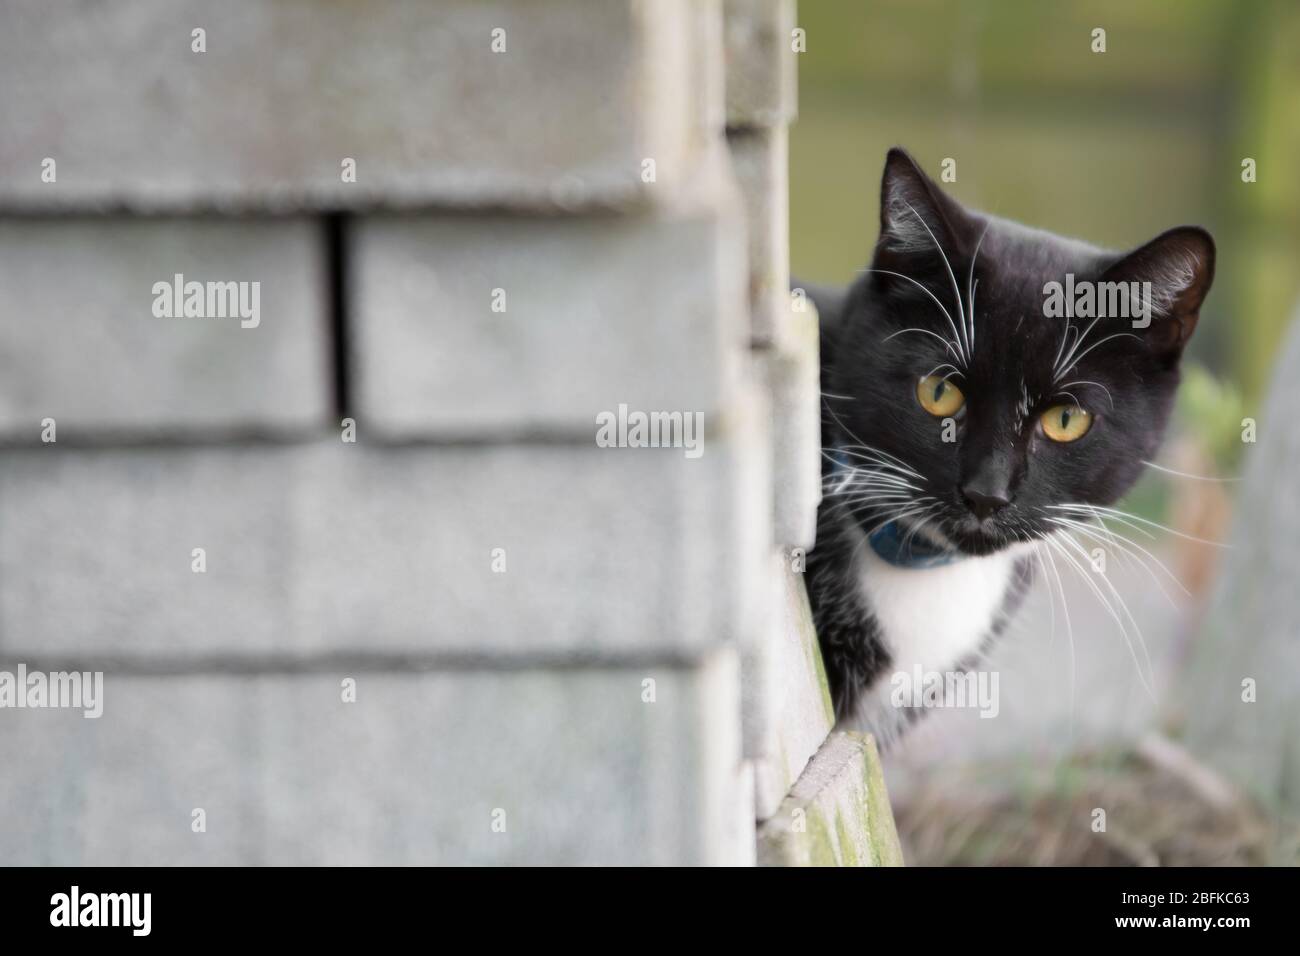 Black and white cat looking from behind a pile of concrete blocks Stock Photo